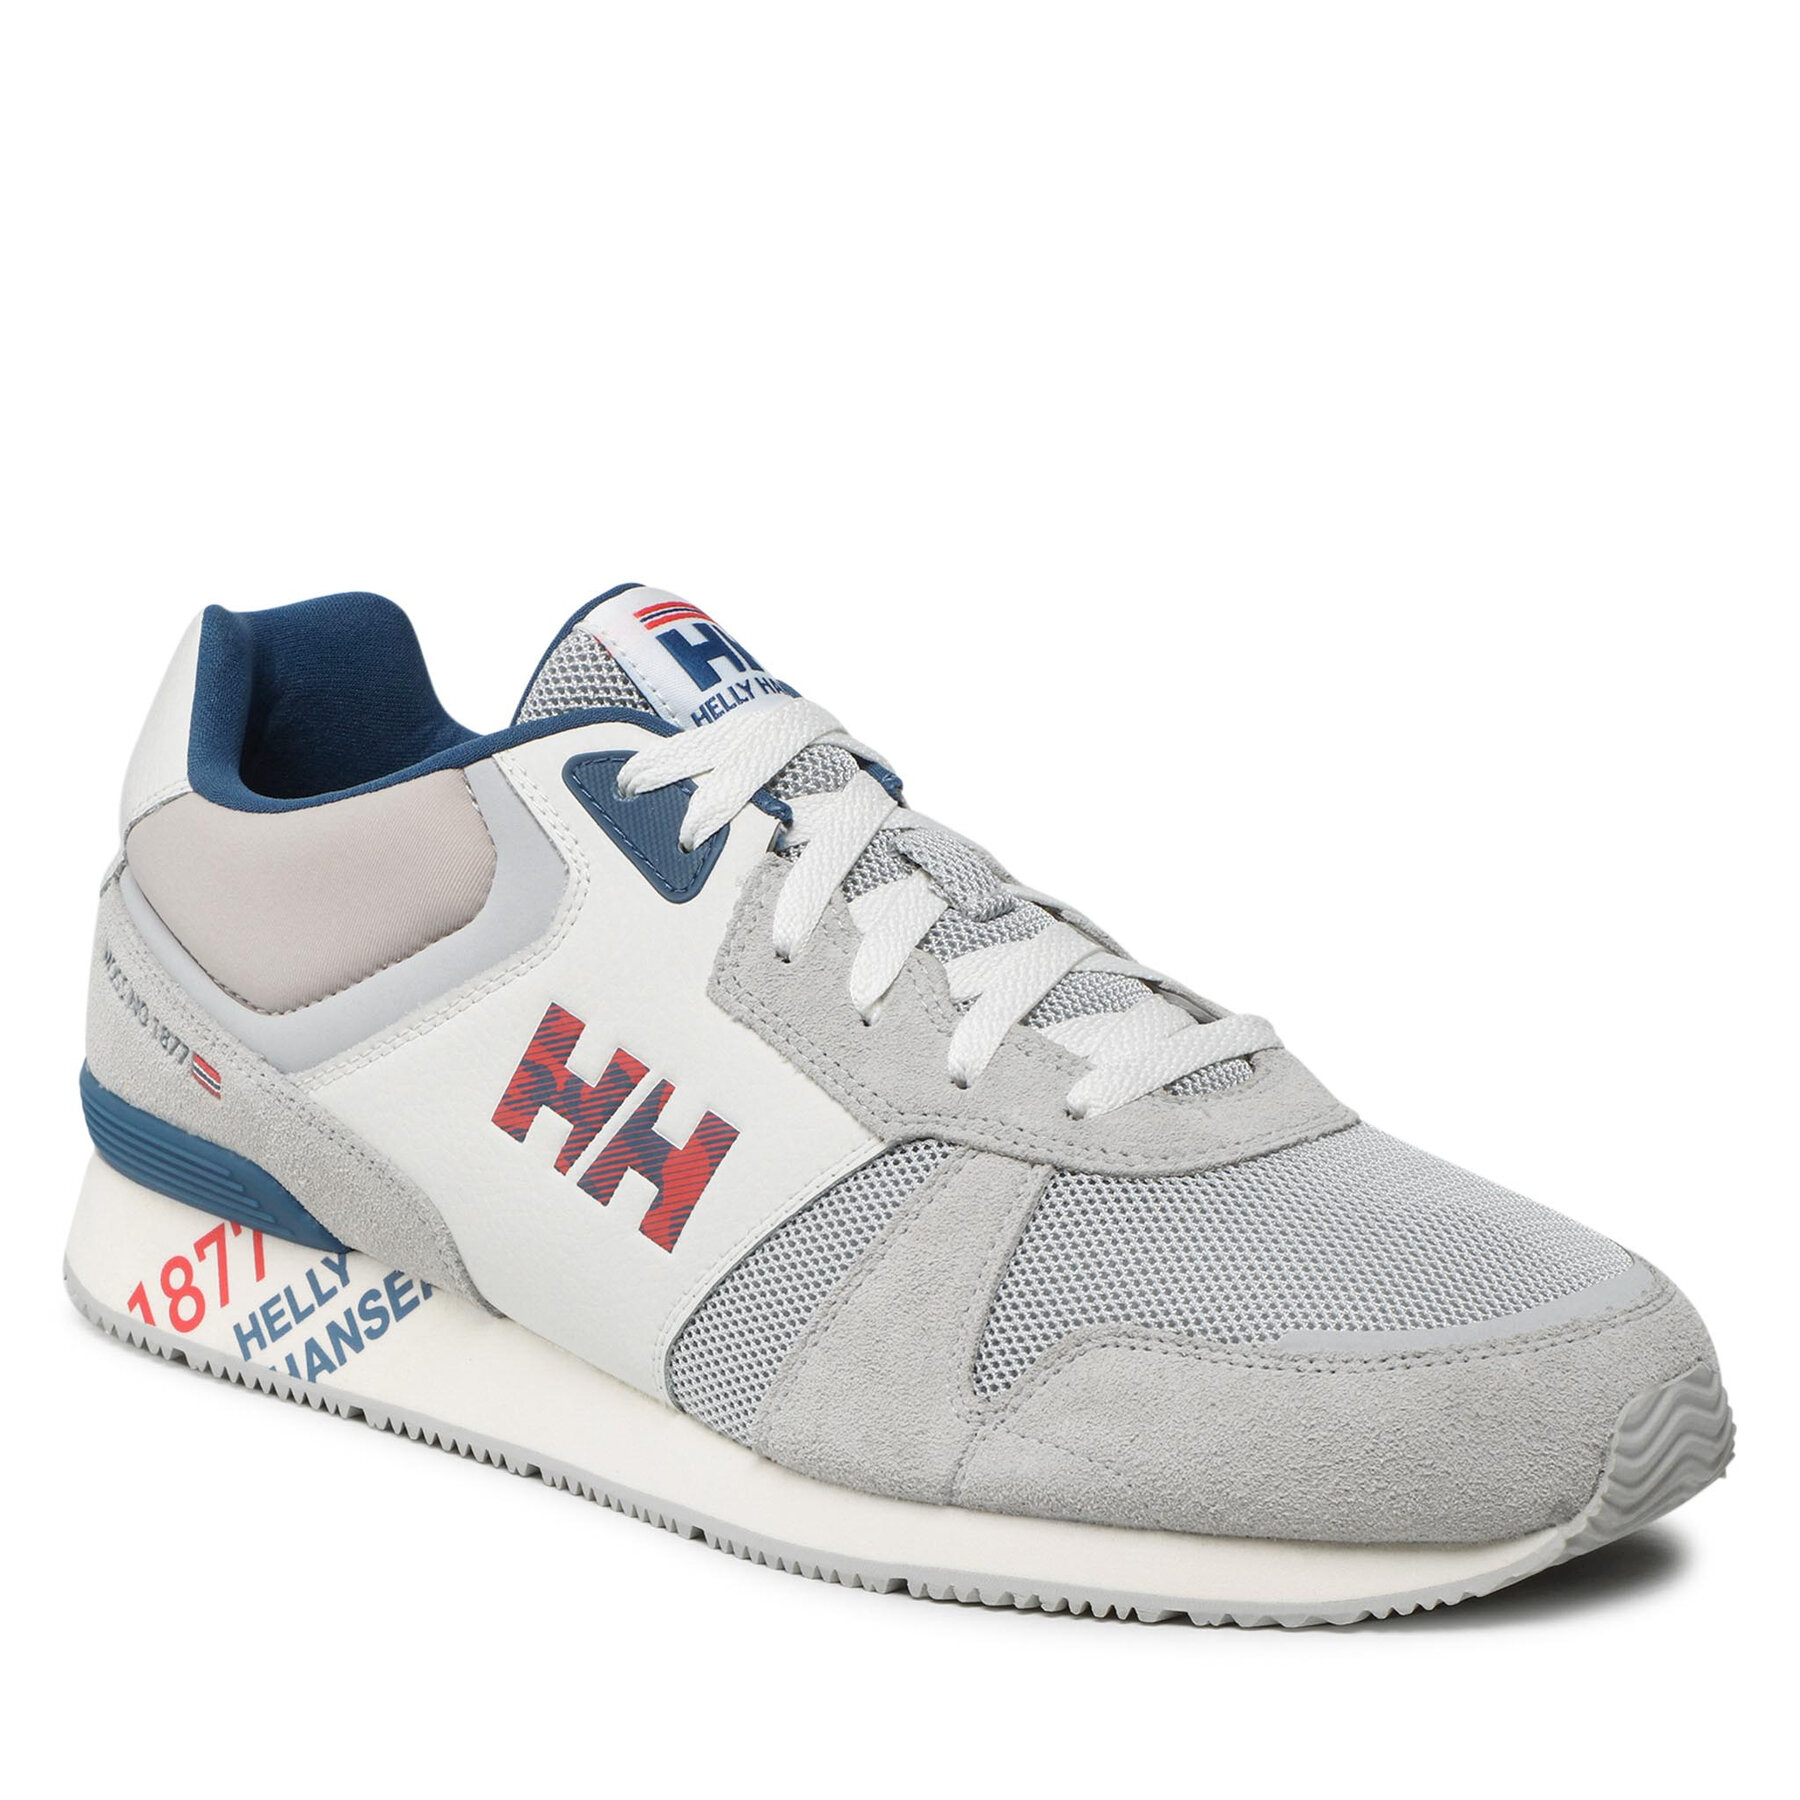 Sneakers Helly Hansen Anakin Leather 11718-853 Grey Fog/Off White